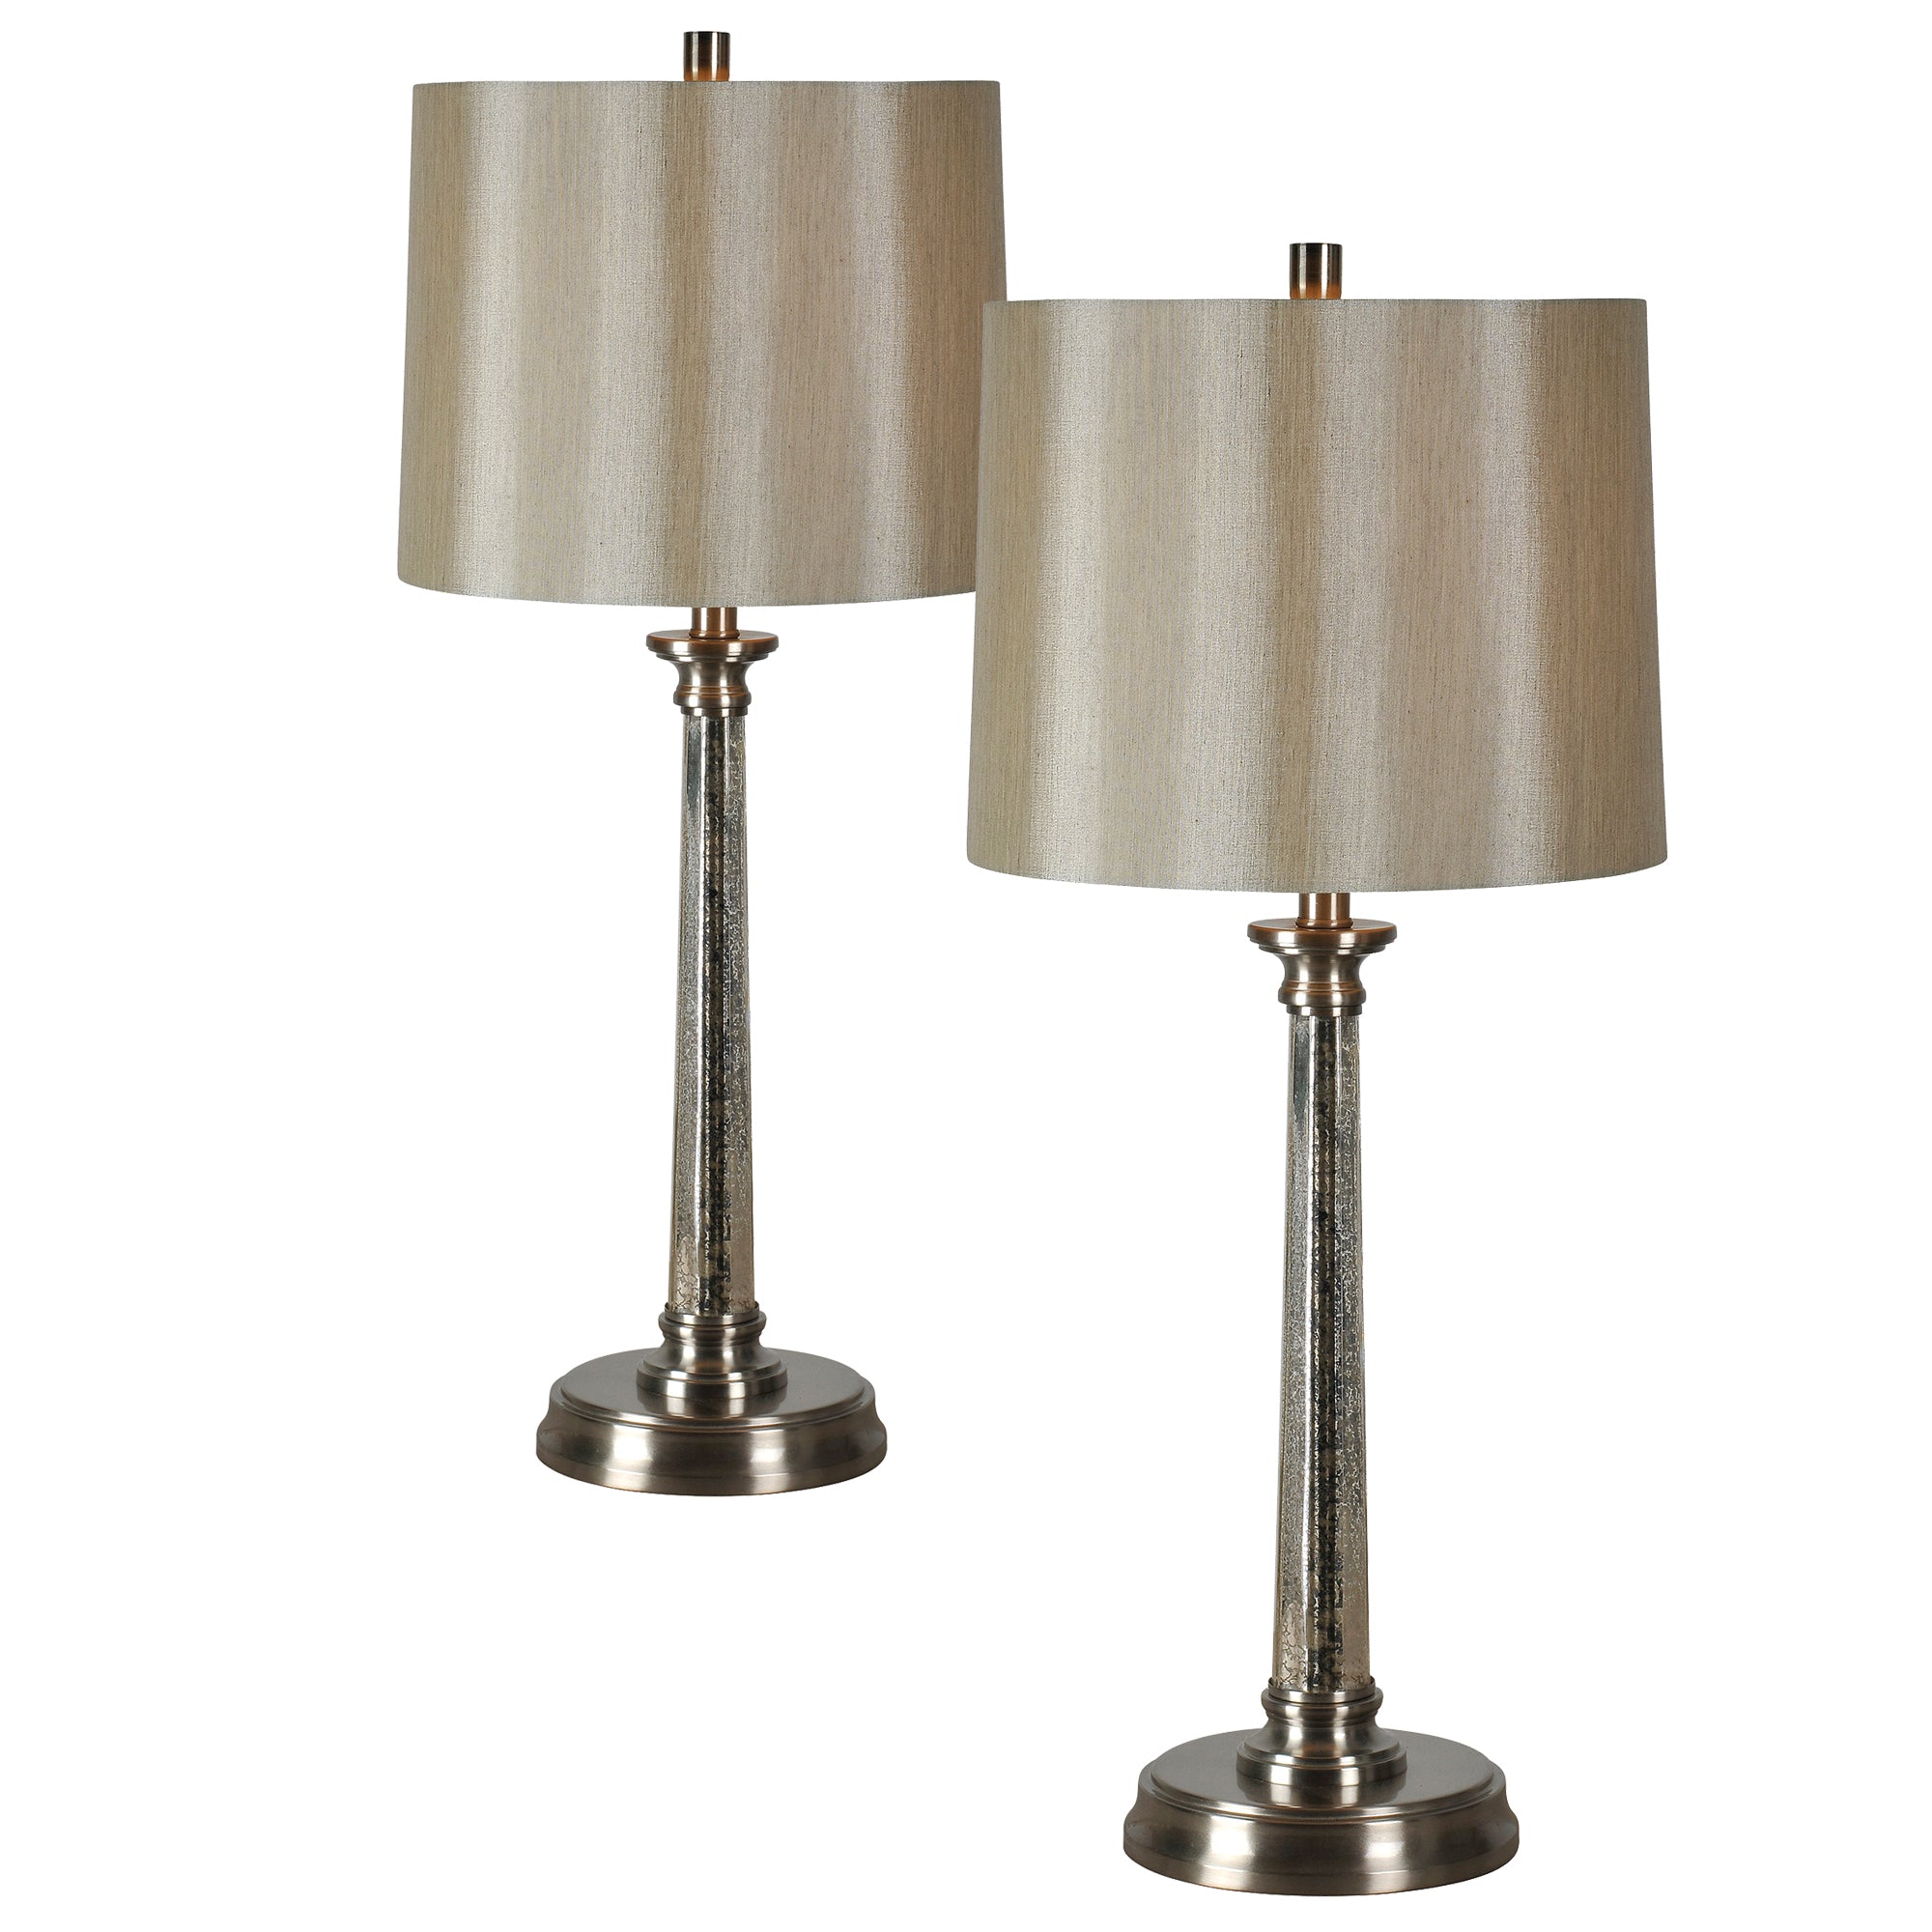 Brooks 13" Set Of 2 Iron - Satin Nickel Plated Table Lamps